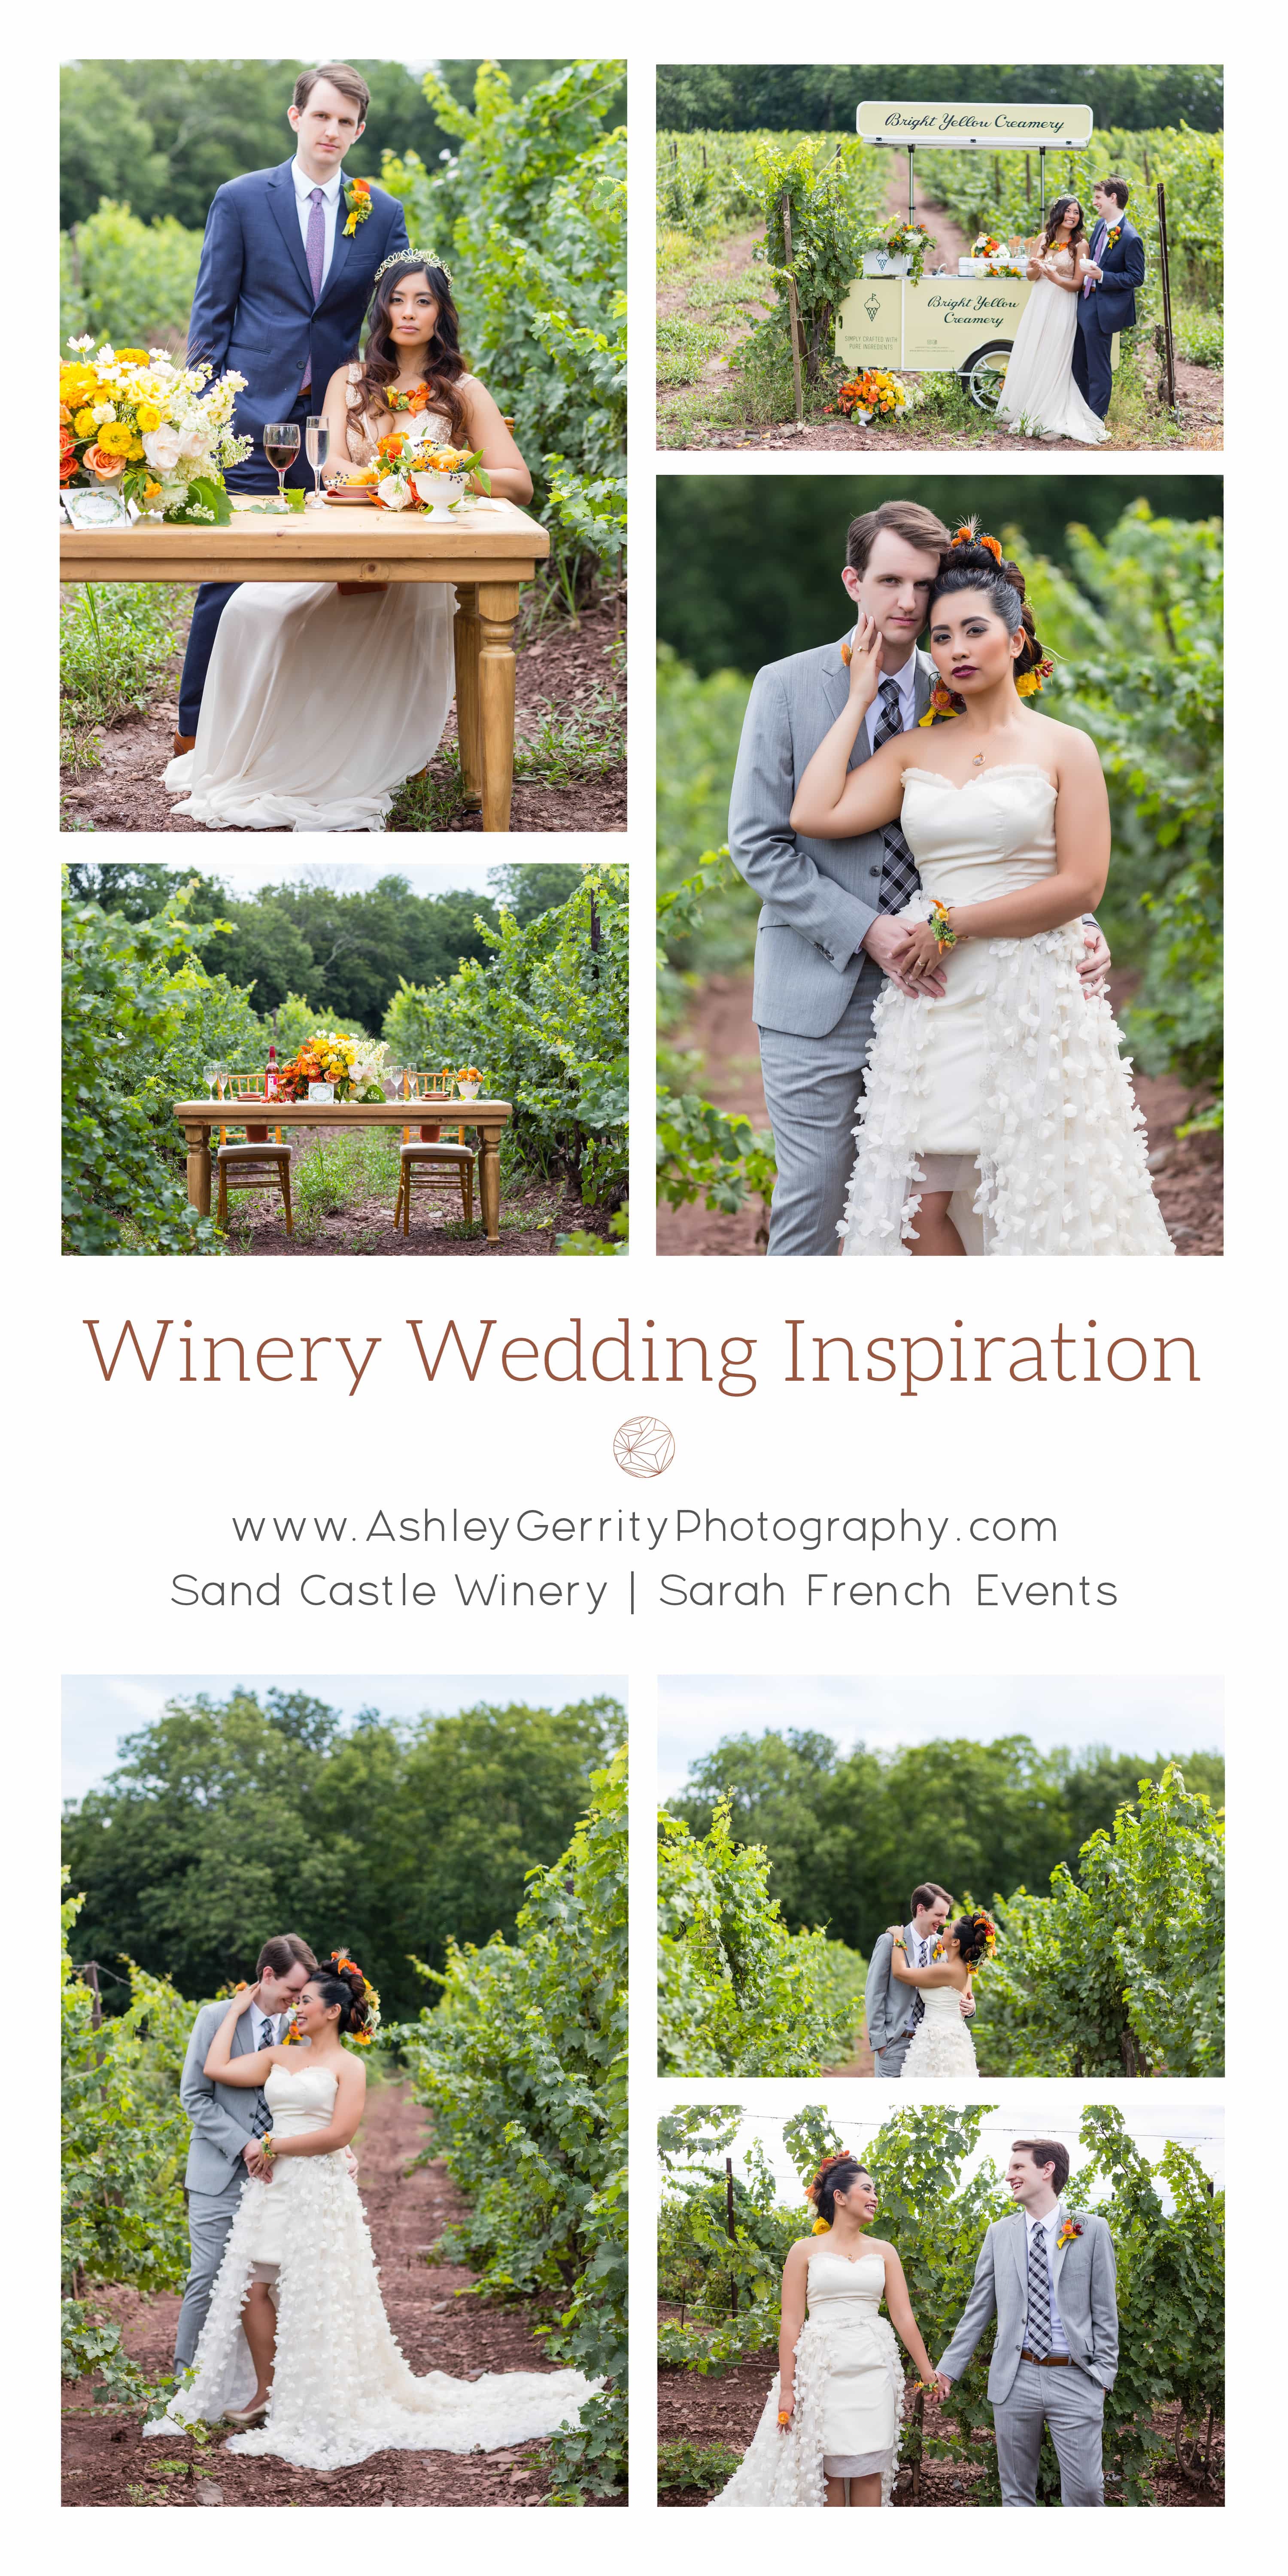 Collage of winery & vineyard wedding inspiration for a colorful outdoor summer wedding, including portraits of a bride & groom in vineyards, sweetheart table with orange & yellow centerpieces in a vineyard.